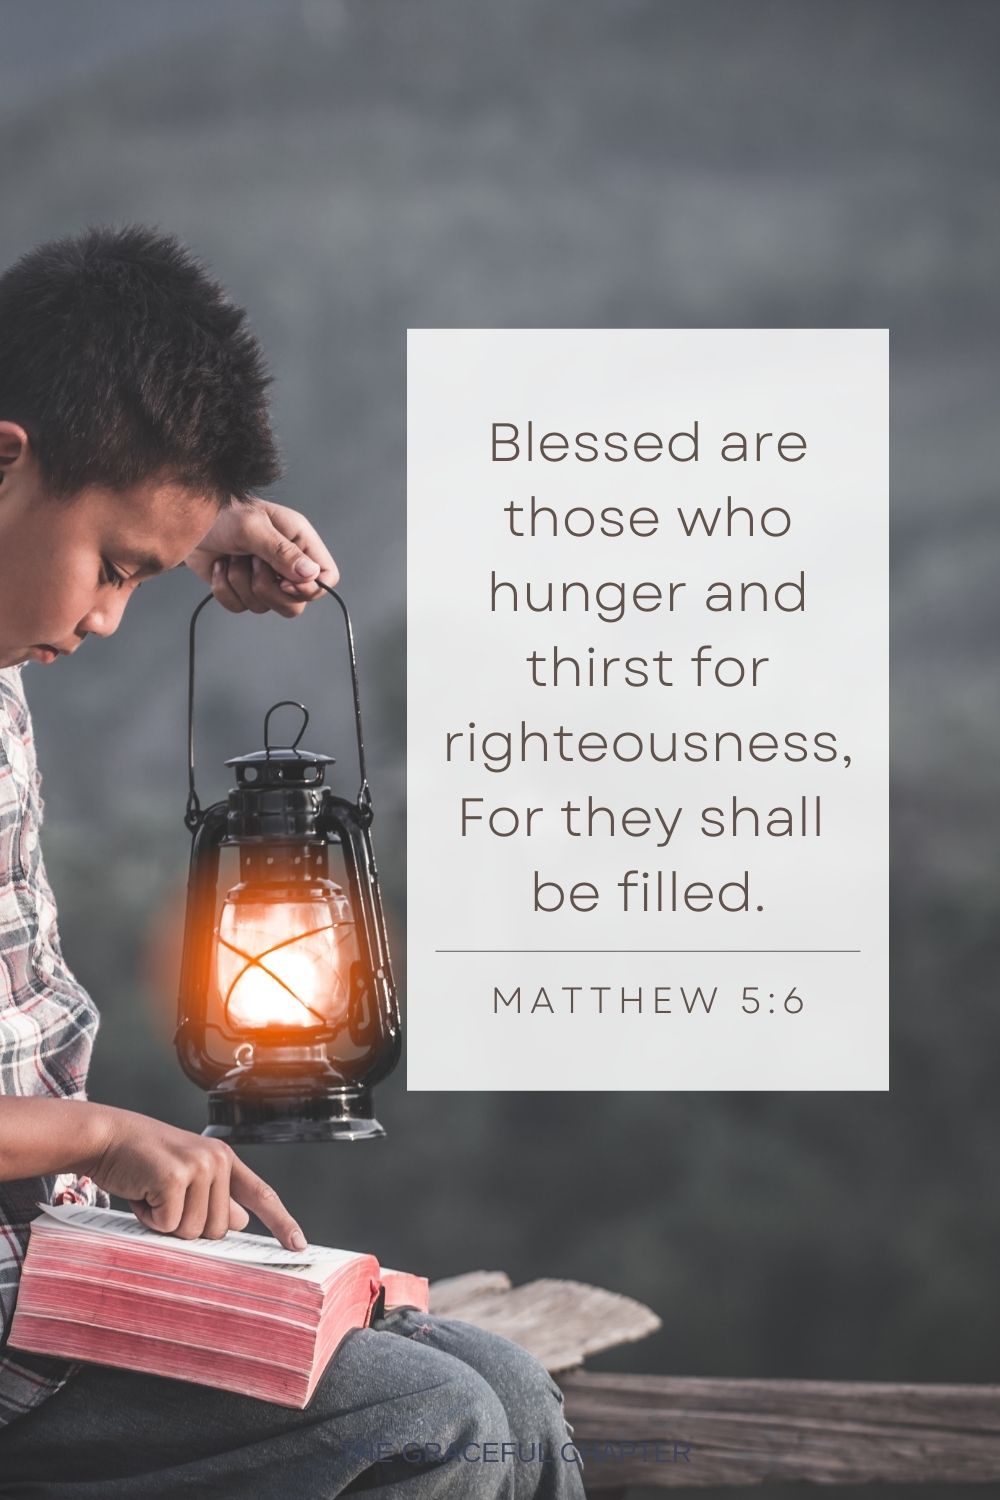 Blessed are those who hunger and thirst for righteousness, For they shall be filled. Matthew 5:6